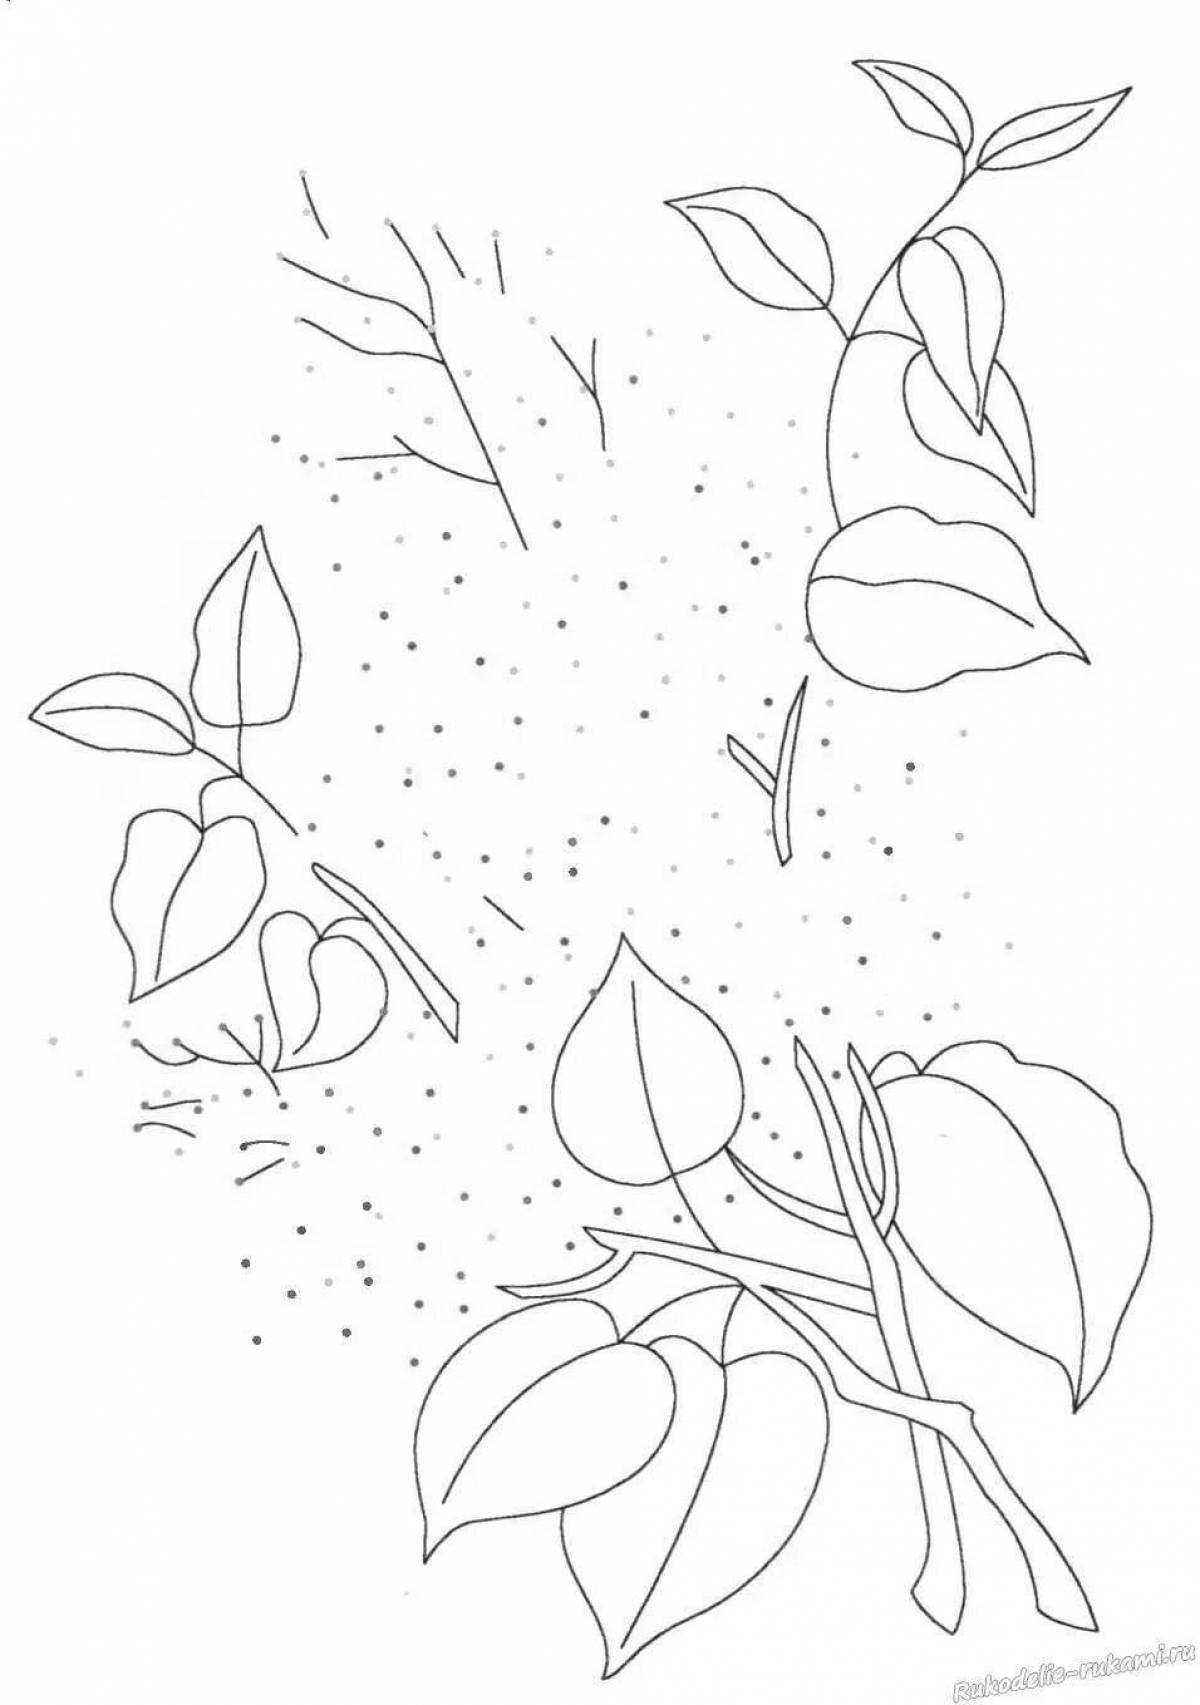 Coloring book shining lilac branch